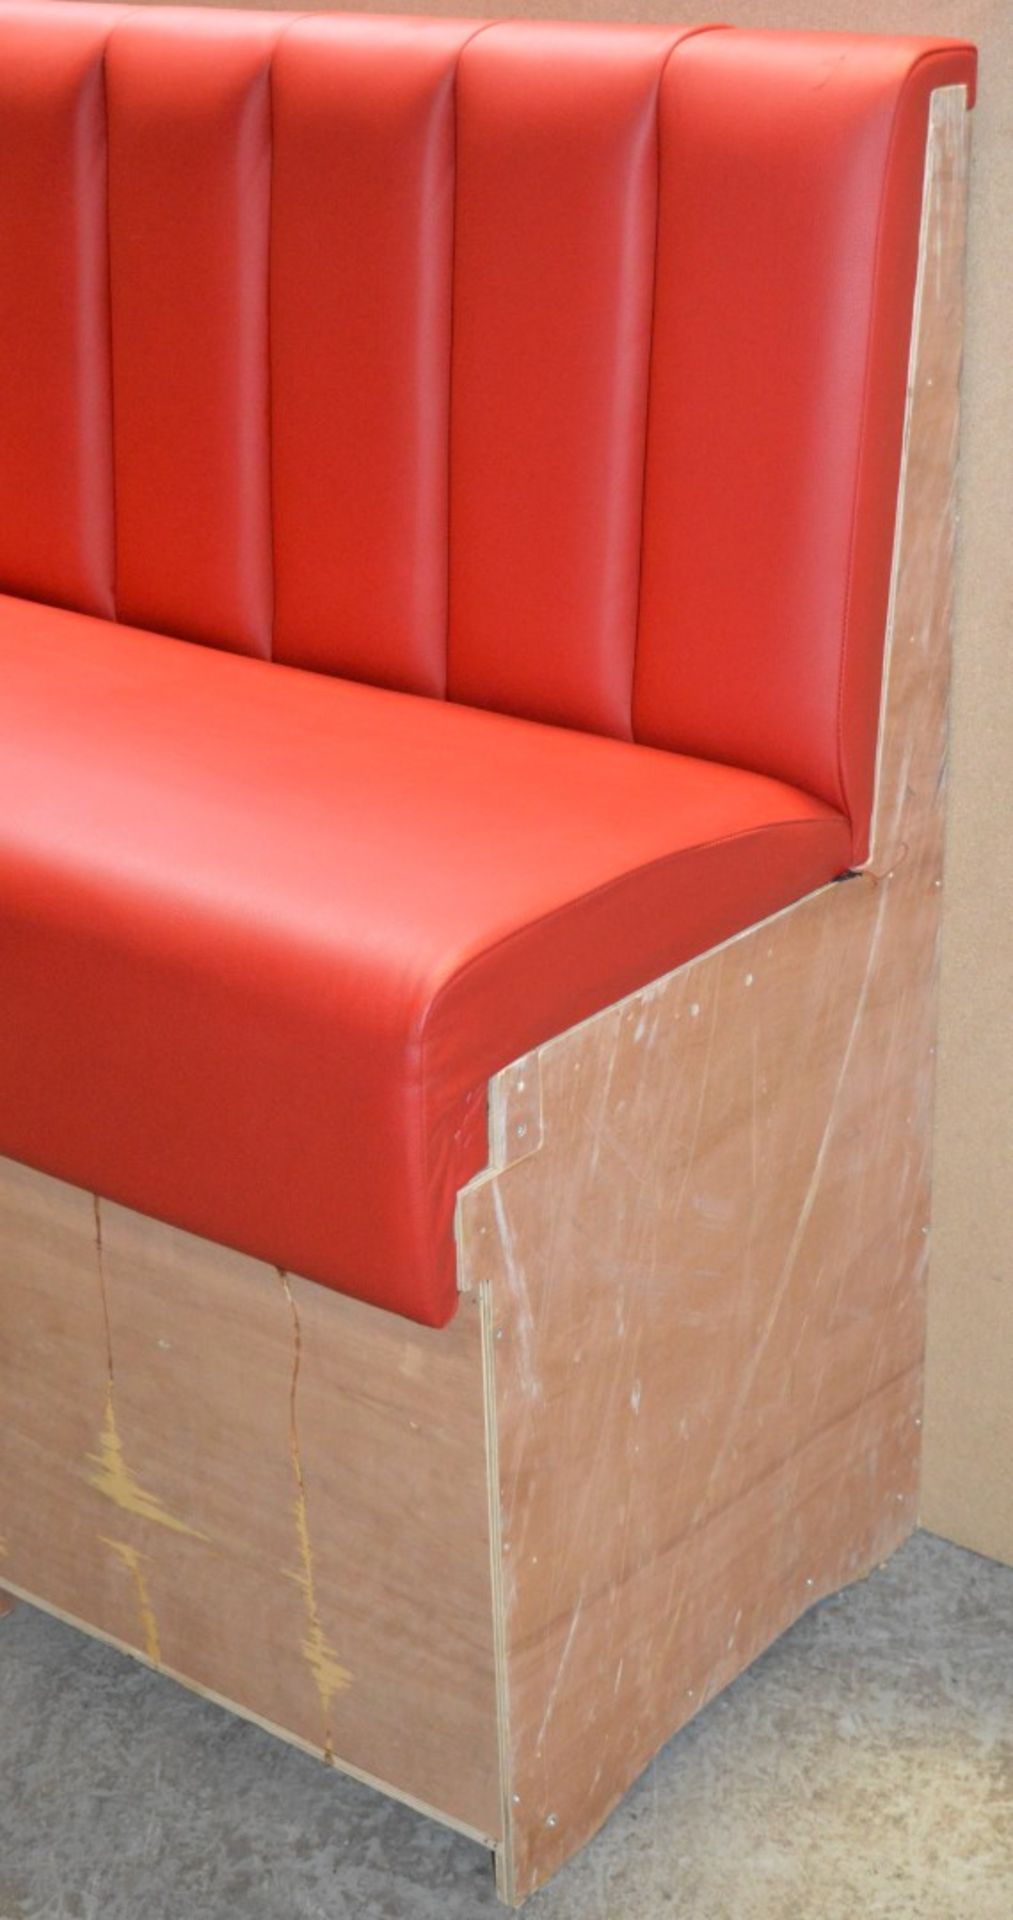 1 x High Seat Single Seating Bench Upholstered in Red Leather - Sits upto Two People - High - Image 11 of 16